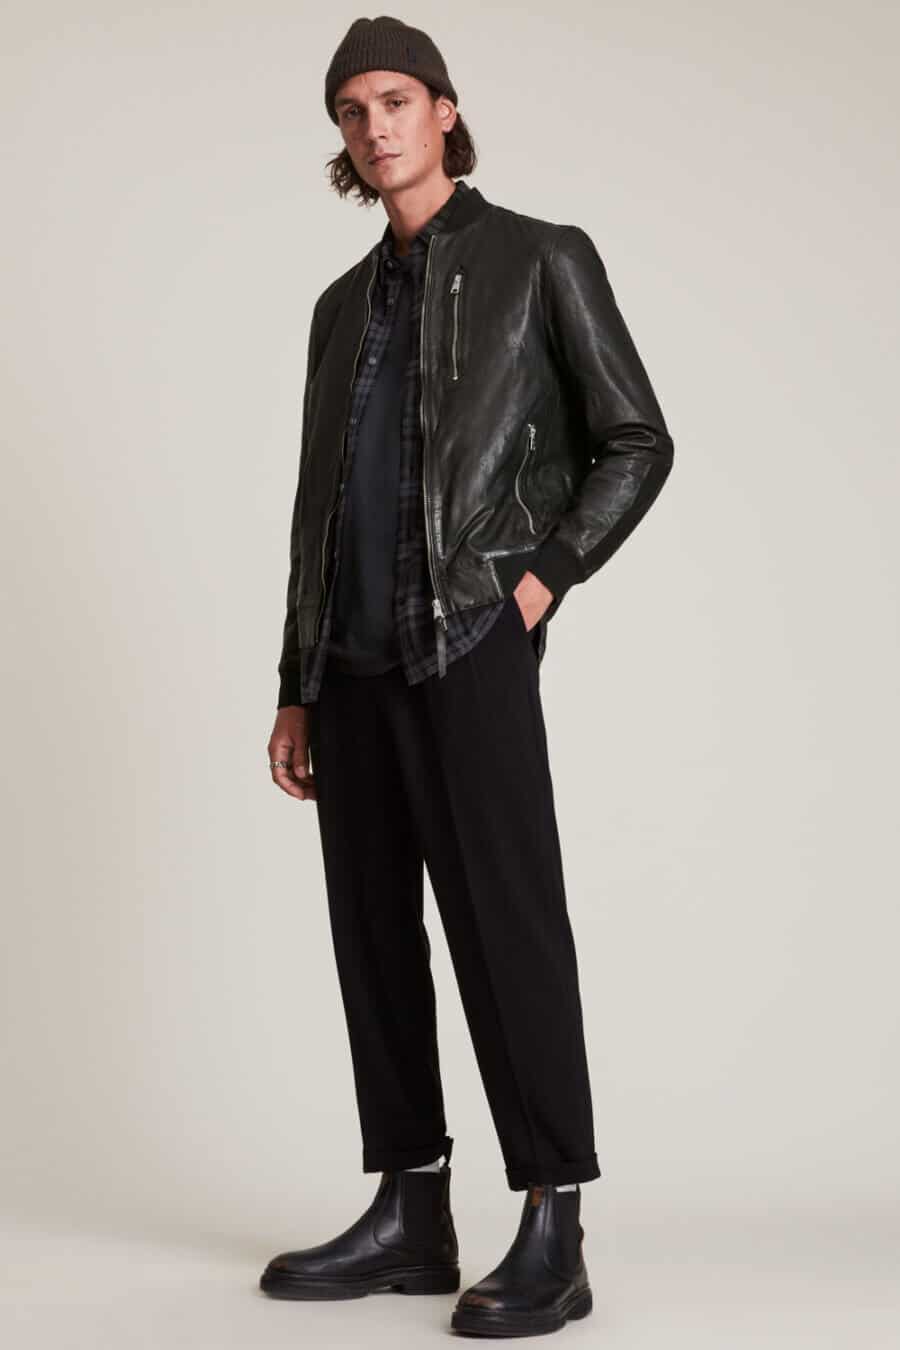 Men's all black edgy outfit with leather bomber jacket, cropped trousers and Chelsea boots